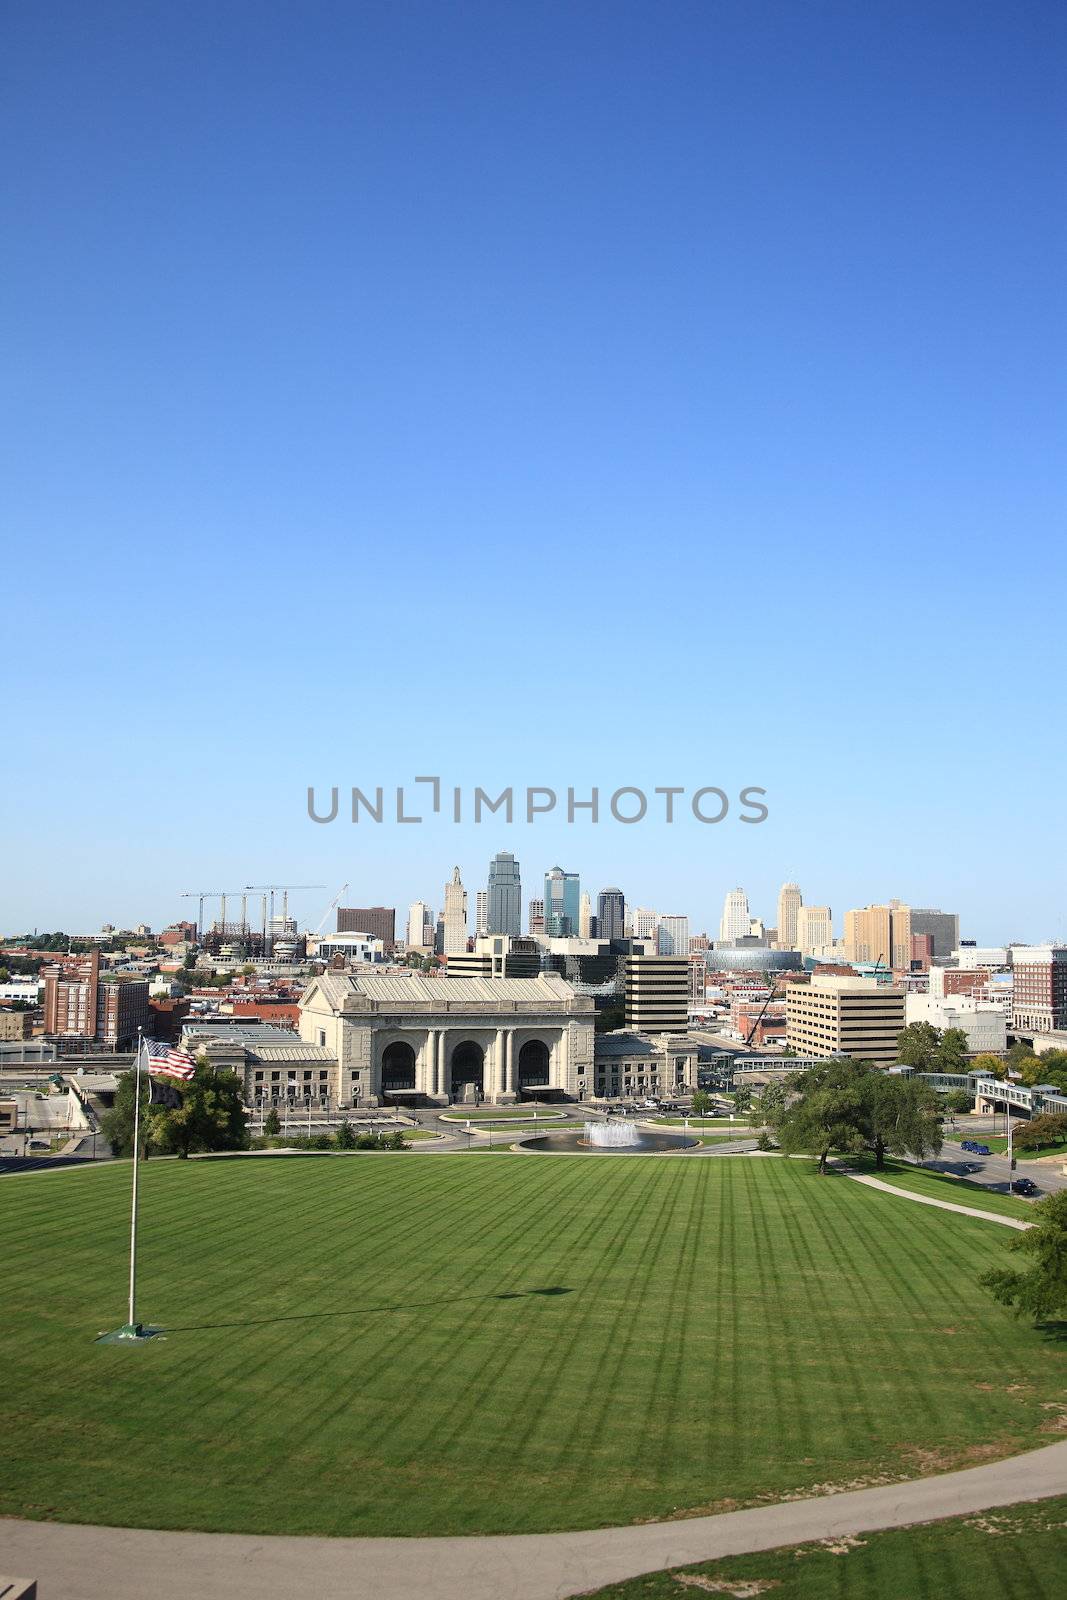 Skyscrapers of KC, with Union Station in foreground